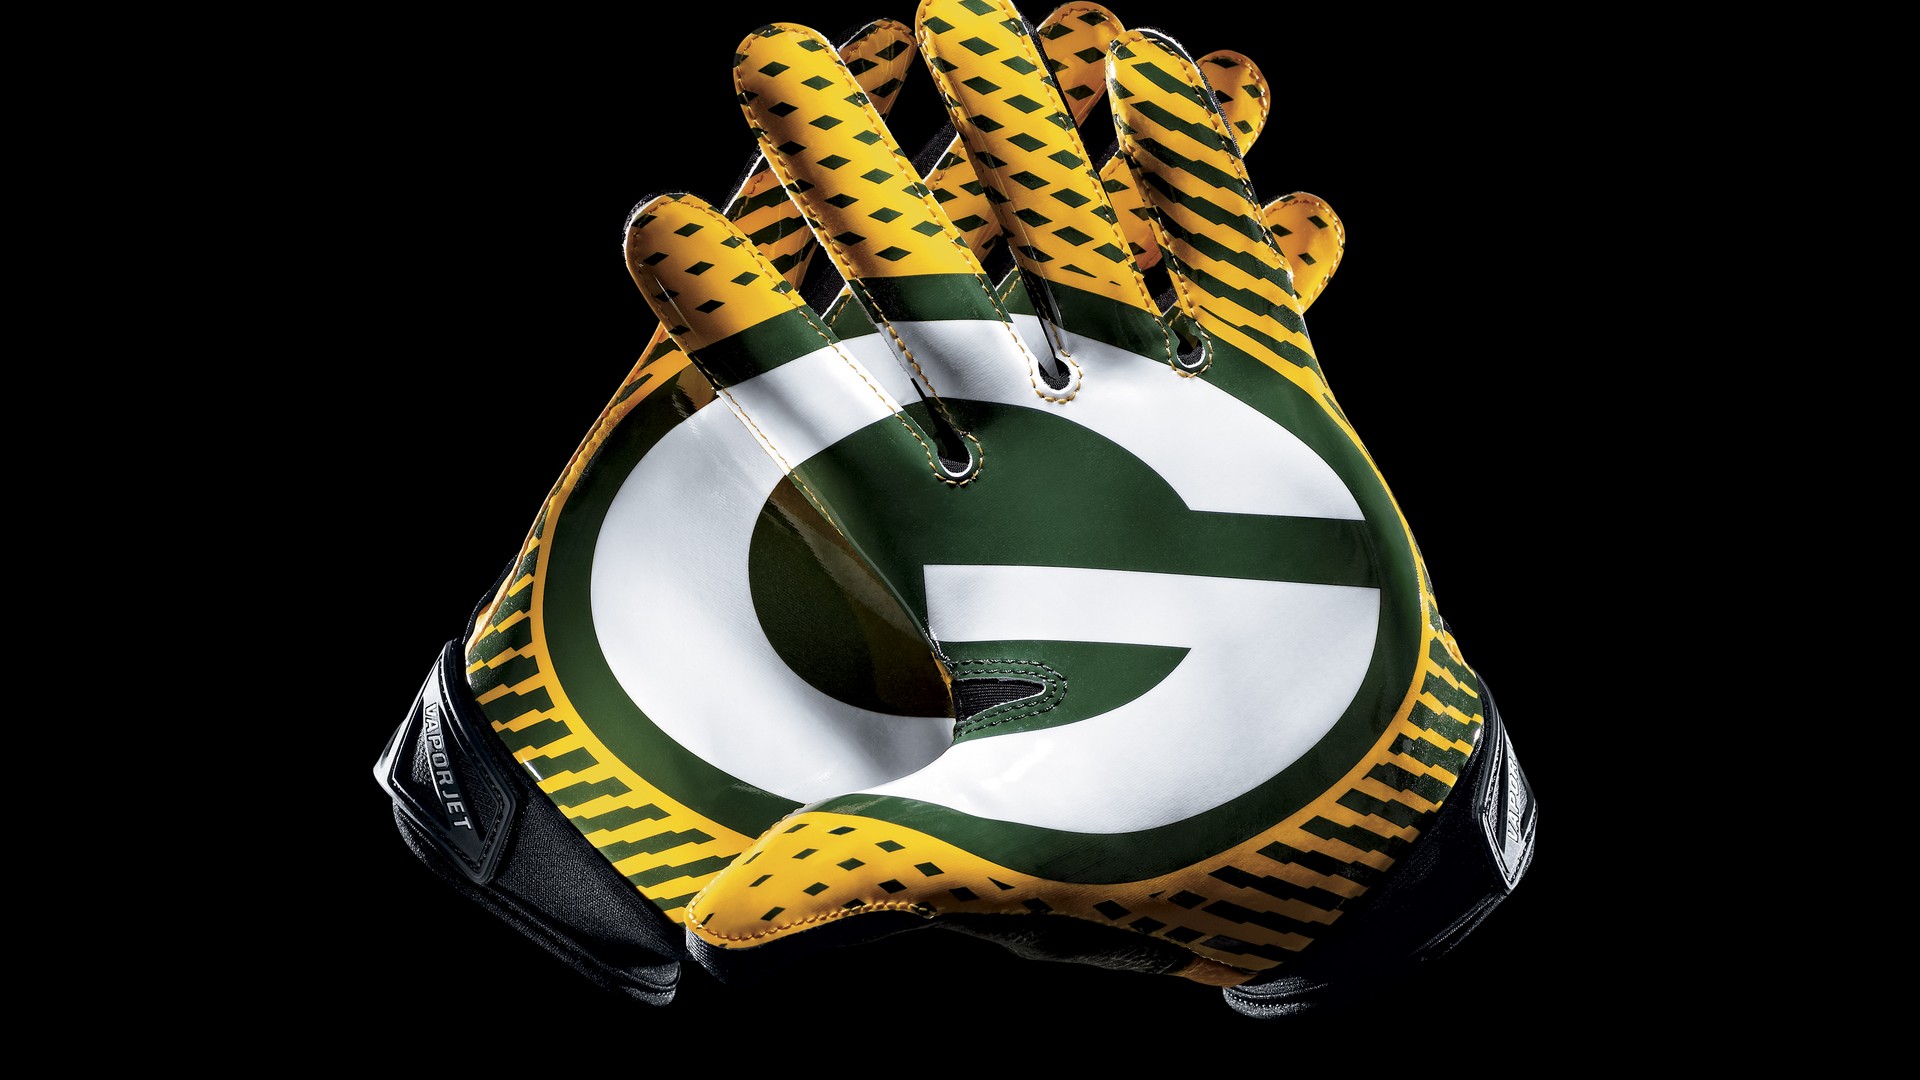 Windows Wallpaper Green Bay Packers NFL With Resolution 1920X1080 pixel. You can make this wallpaper for your Mac or Windows Desktop Background, iPhone, Android or Tablet and another Smartphone device for free